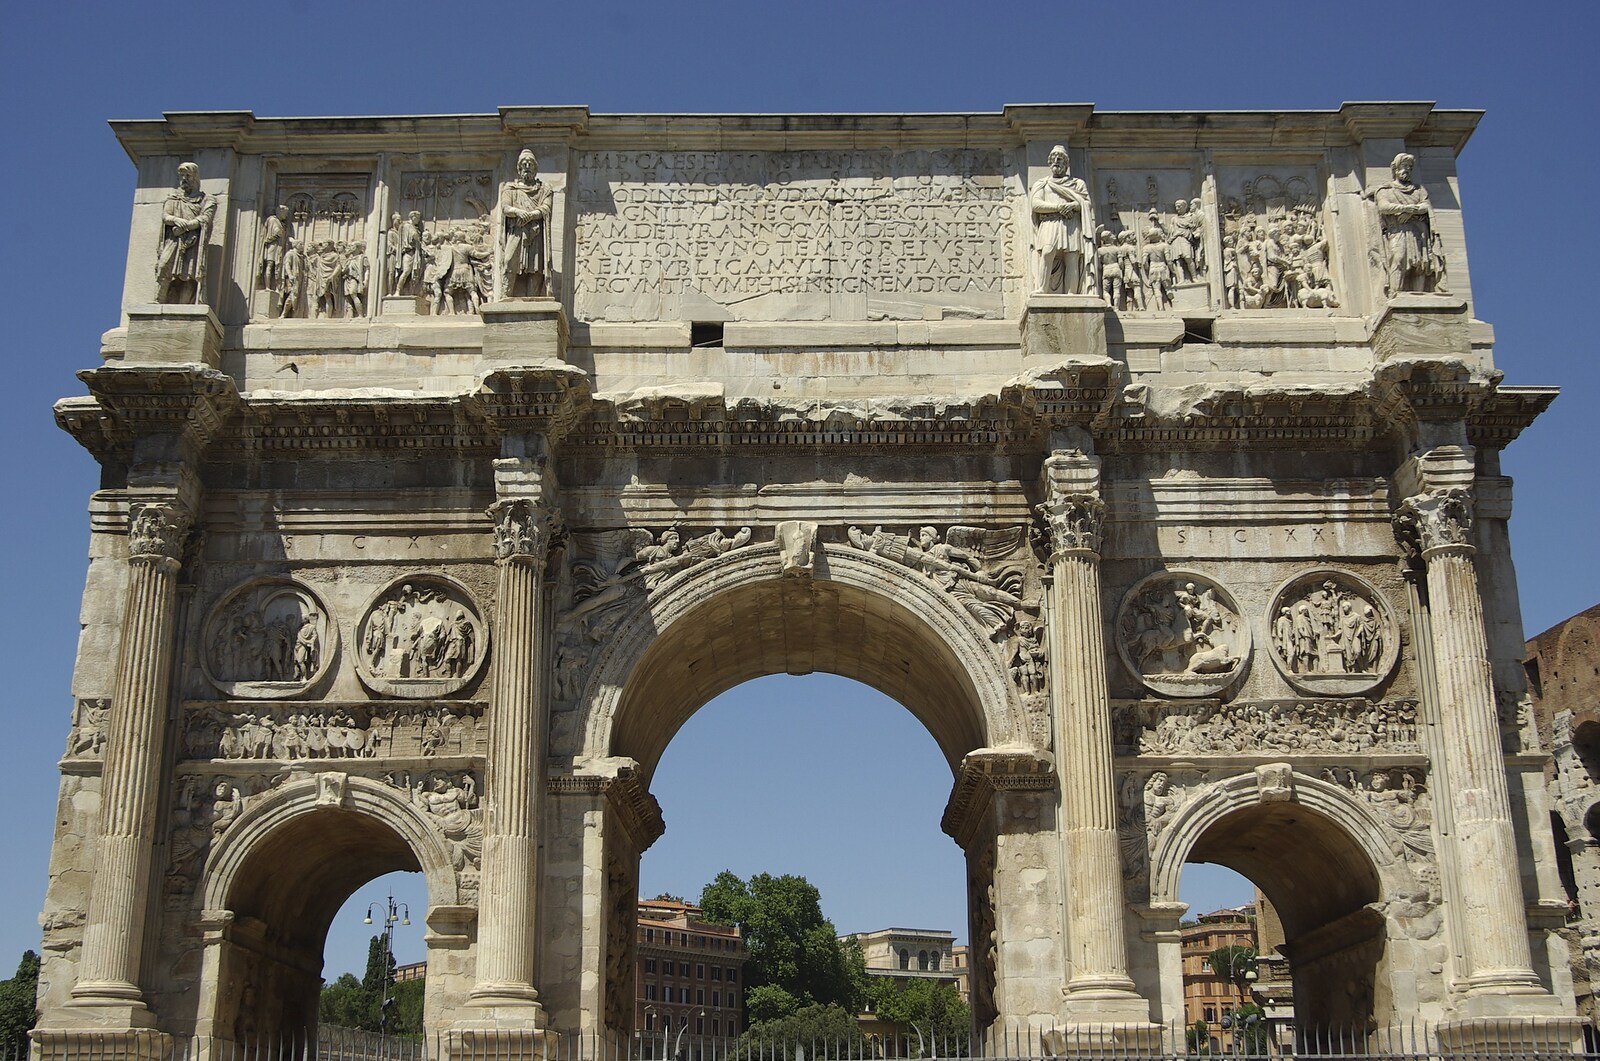 The Arch of Constantine from A Sojourn in The Eternal City, Rome, Italy - 22nd July 2008